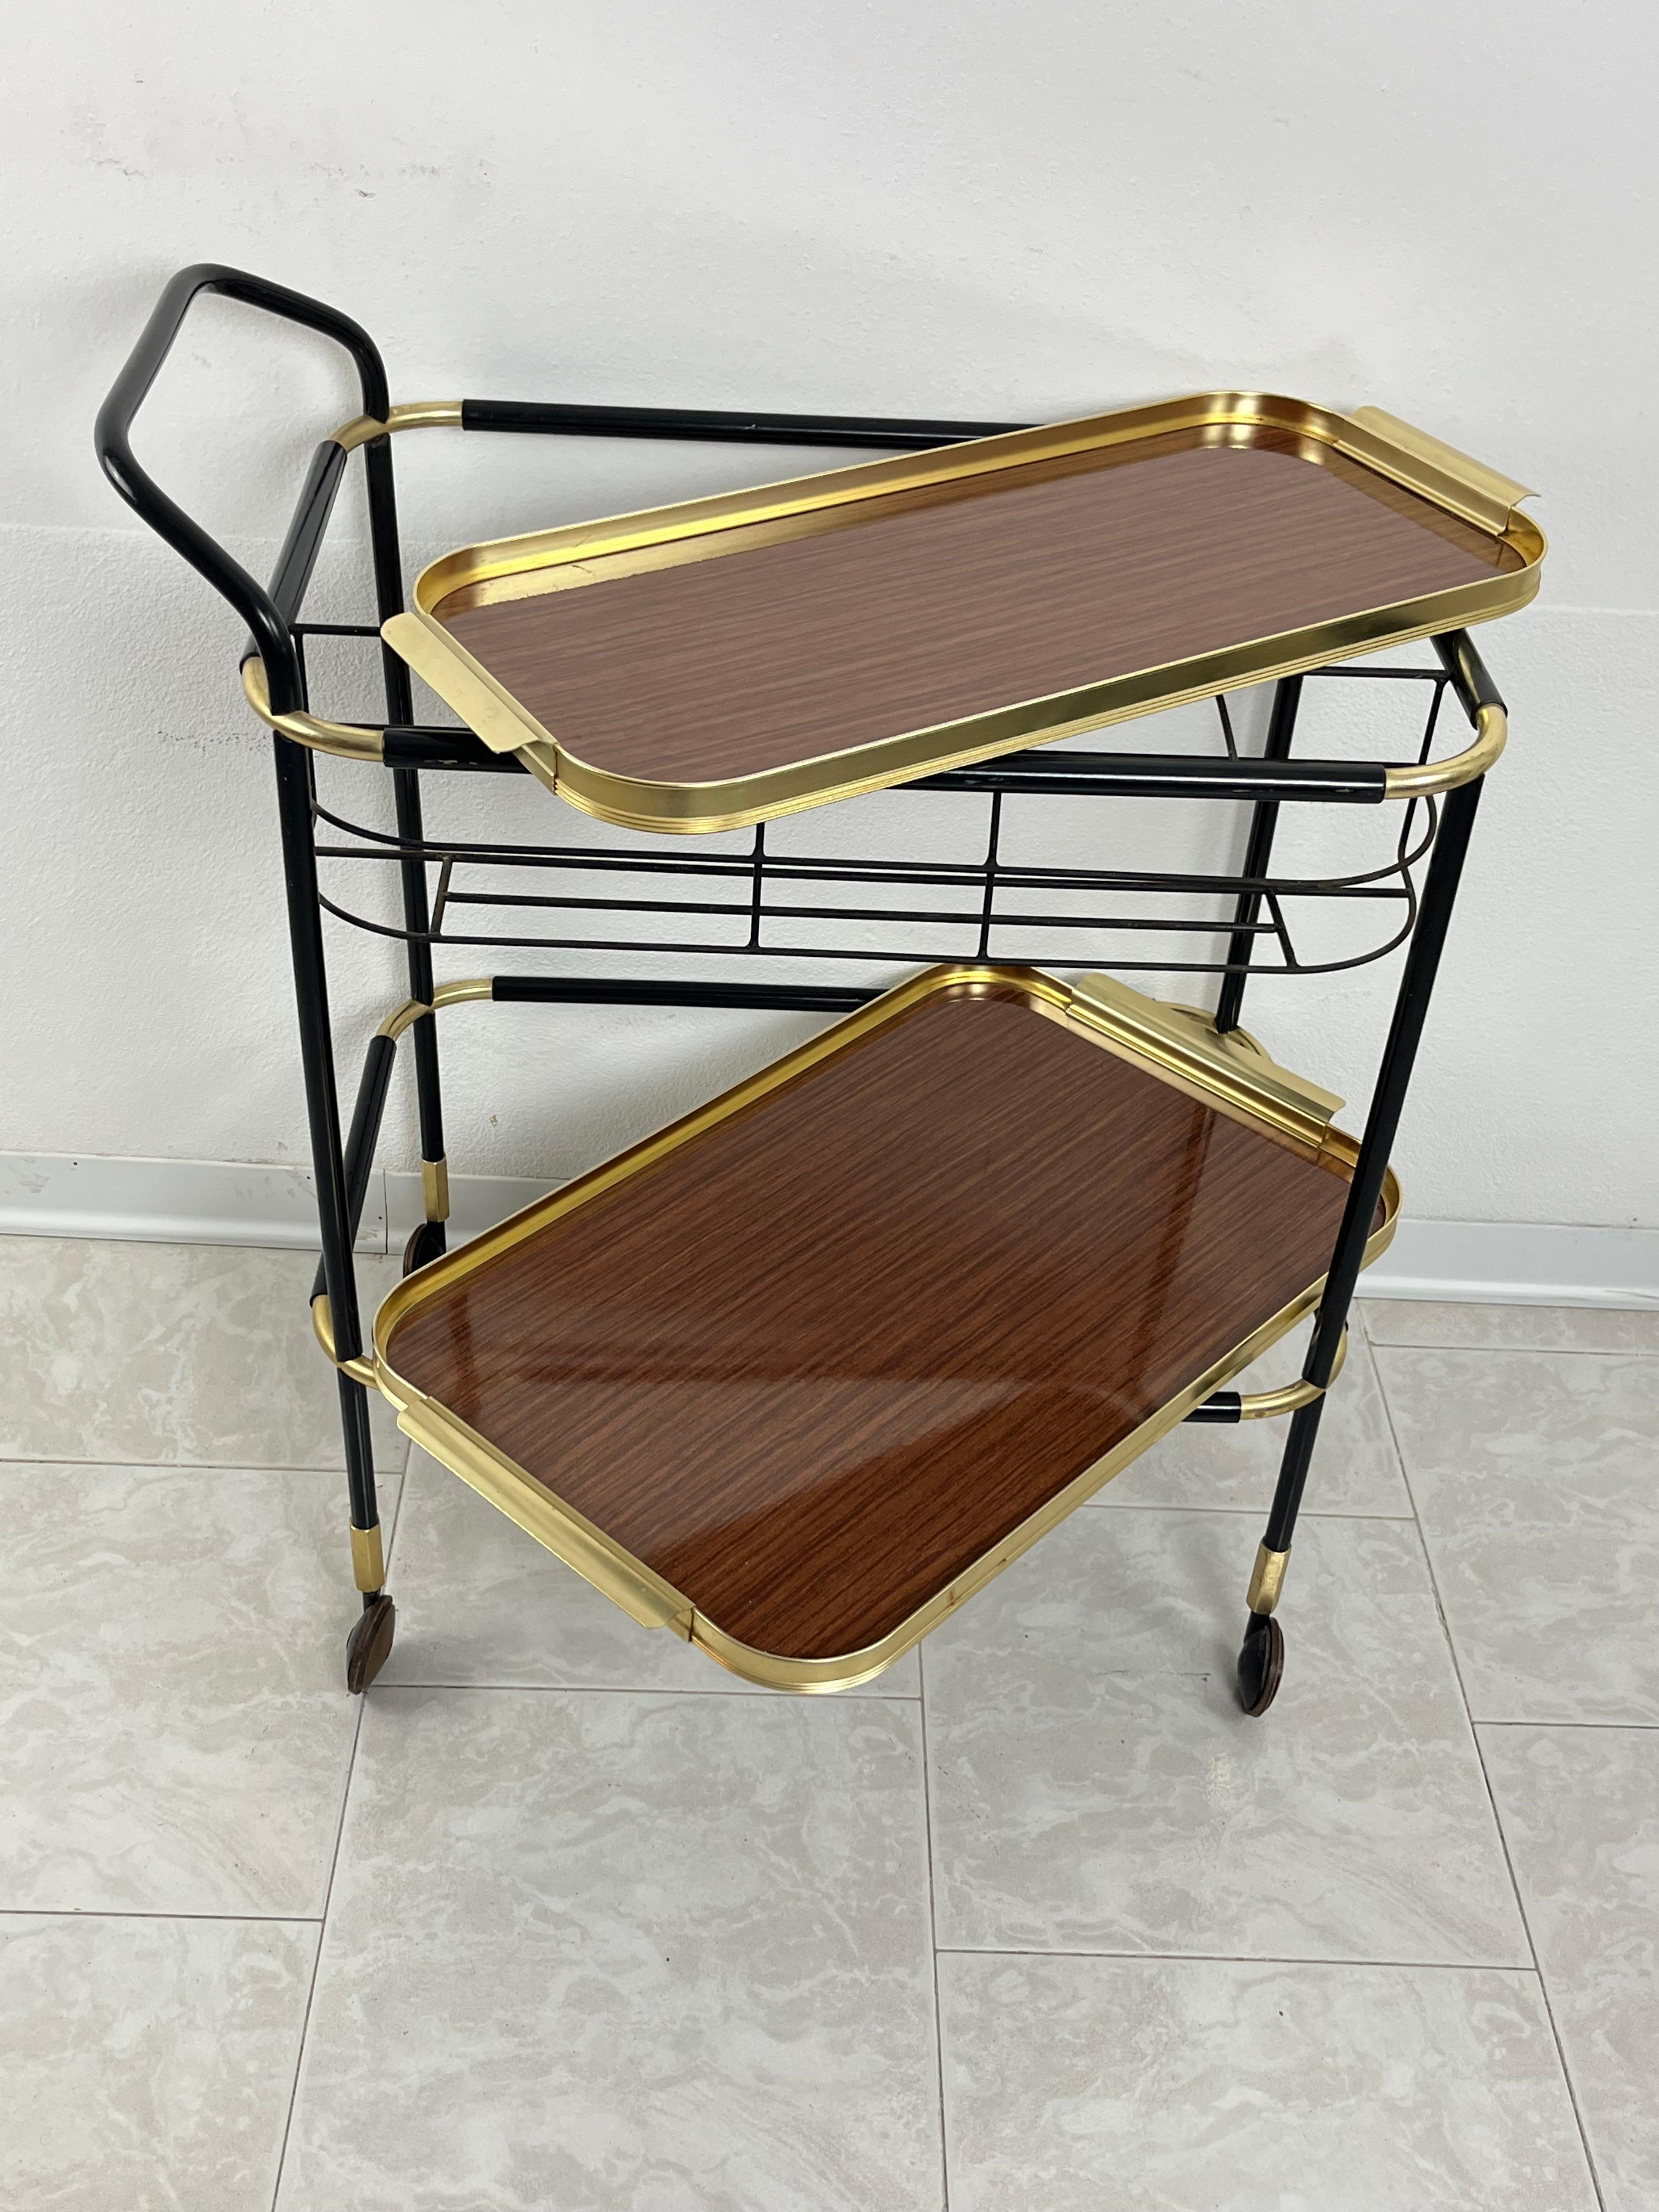 Italian Mid-Century Brass Bar Cart Attributed to Ico Parisi Removable Trays 1960s For Sale